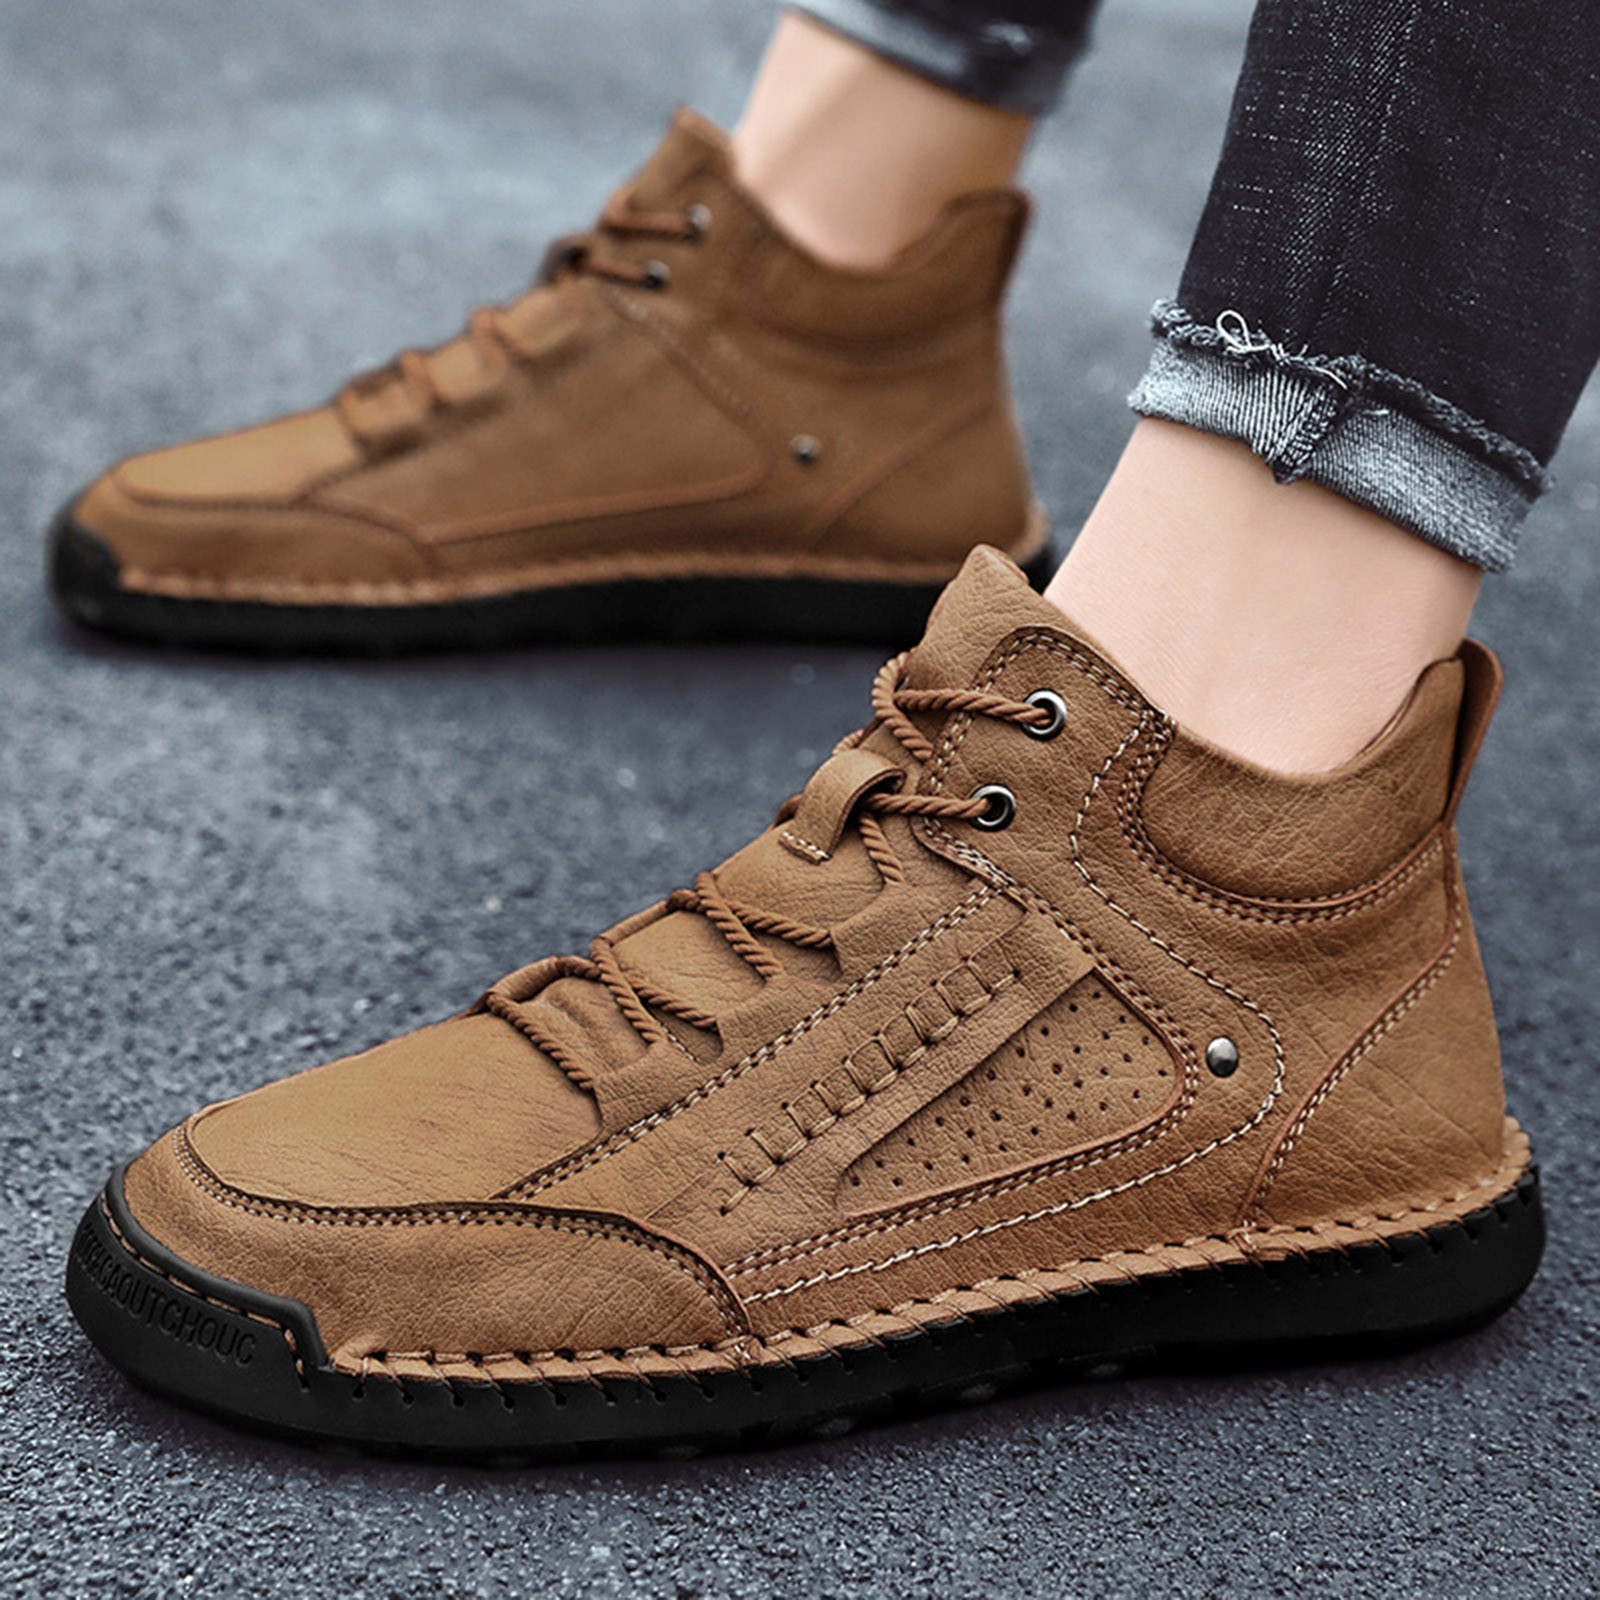 CBGELRT Shoes for Men Fashion Men's Sneakers Black Tennis Shoes Men 2022 New Large Size Cross Handmade Retro Stitched Leather Comfortable Casual Shoes Male Beige 44 - image 2 of 9